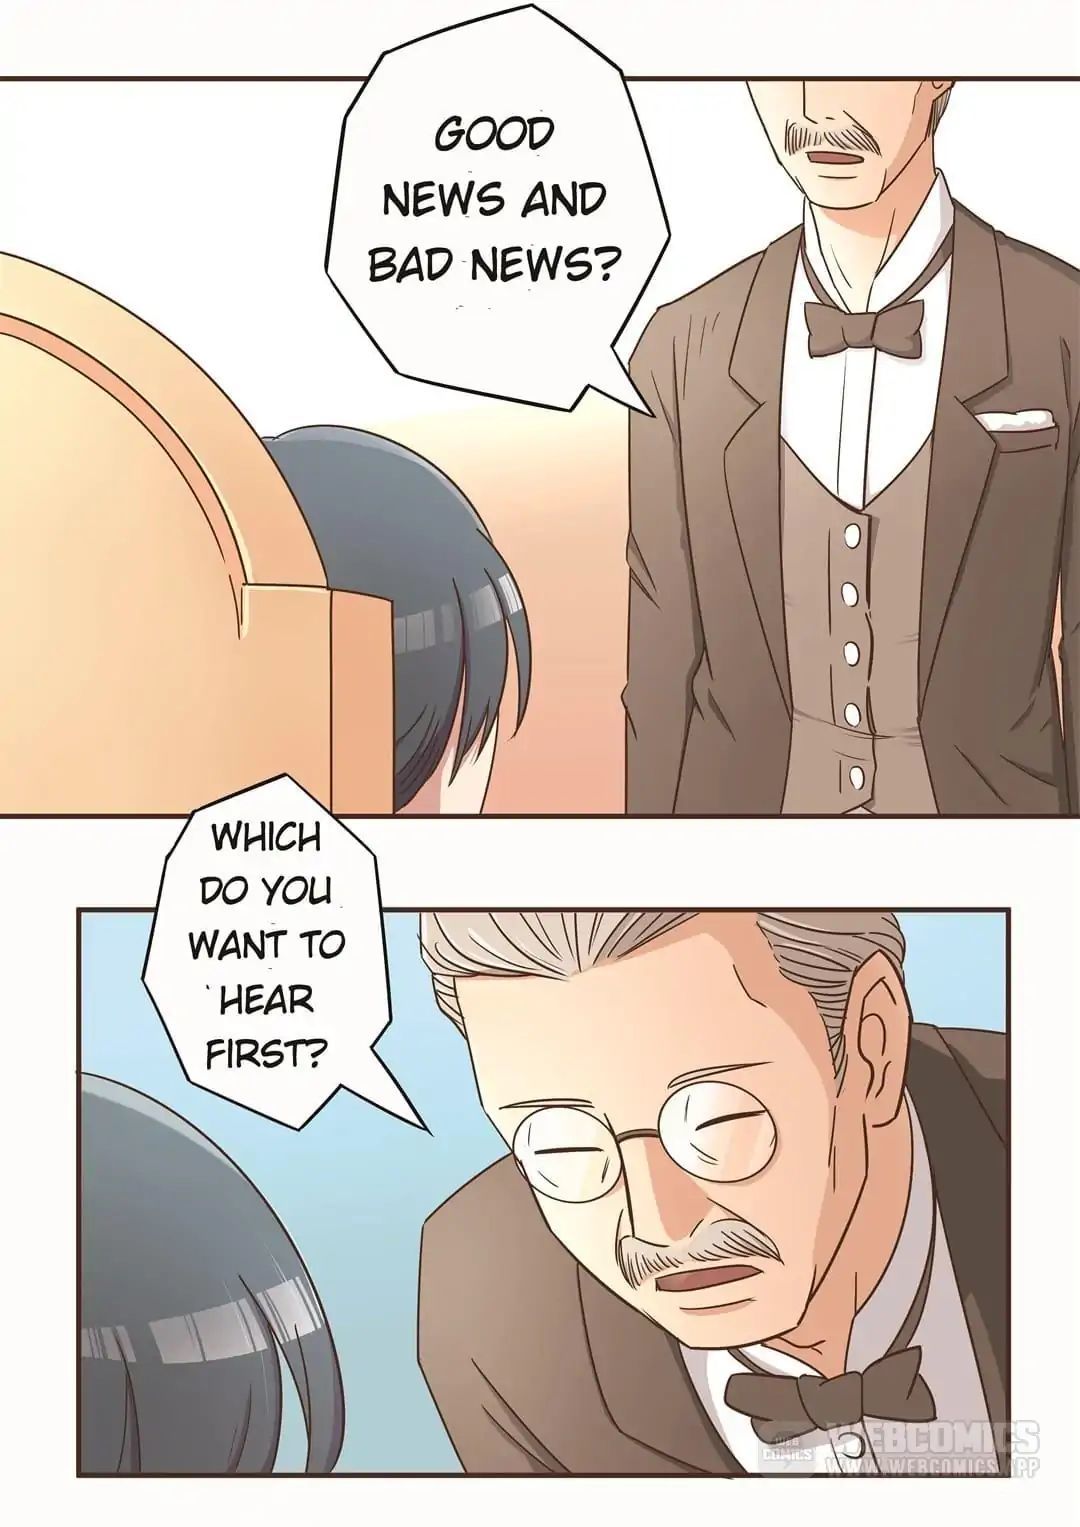 Miss. Delinquent 恶女千金 Chapter 6 - page 1